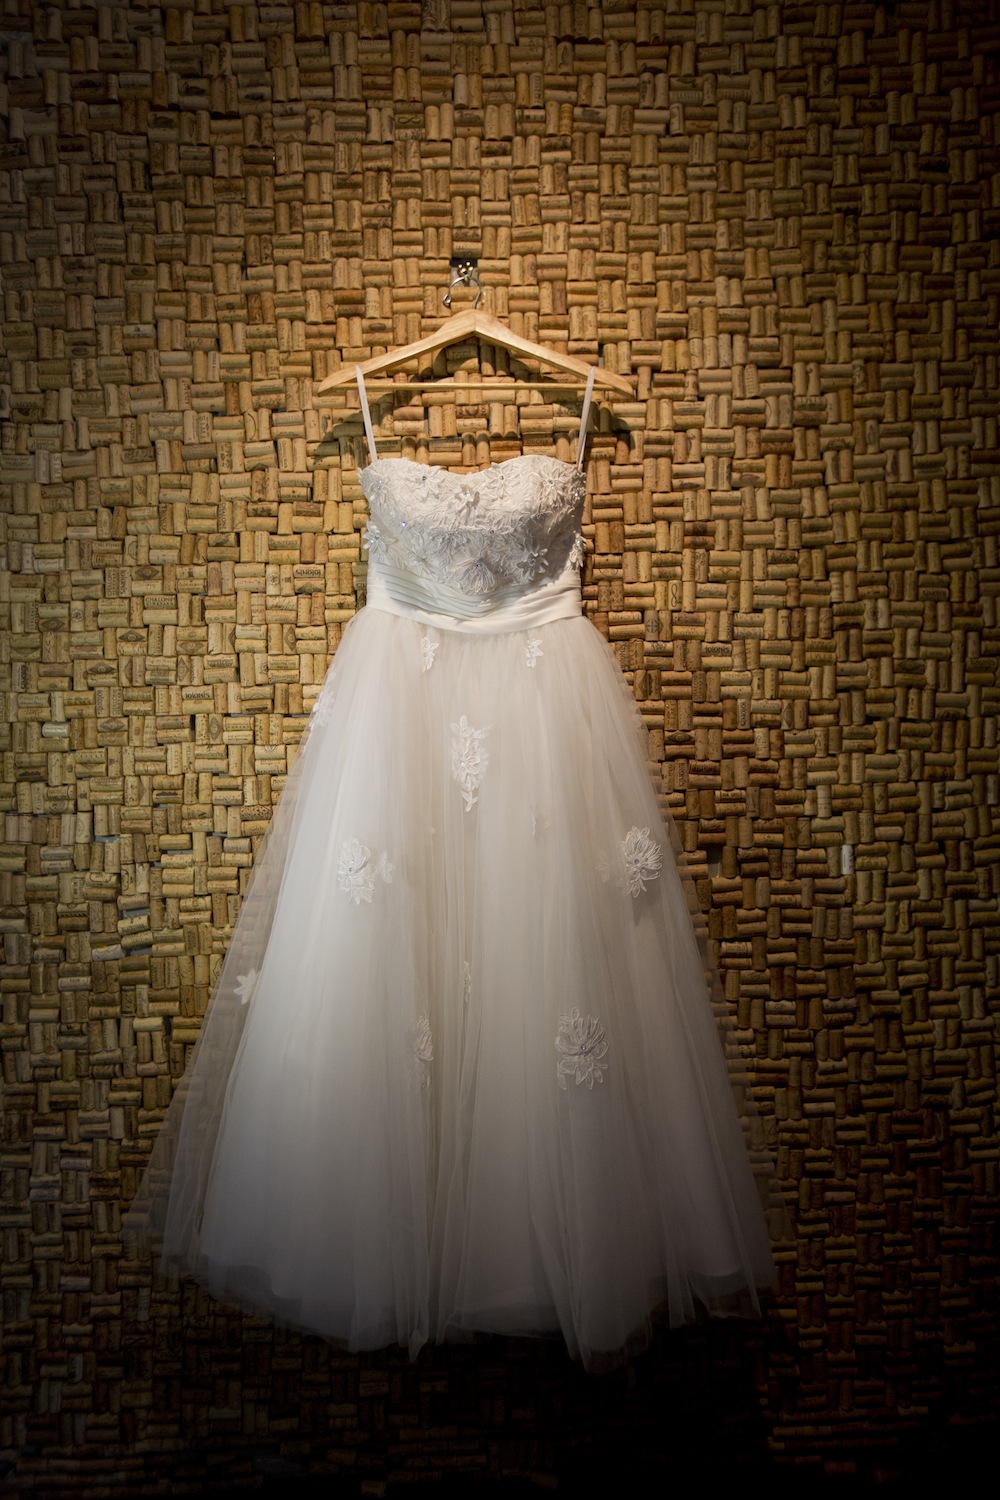  Gorgeous Retro Style Wedding Dress from The Dress Matters / photo by Krista Patton Photography 